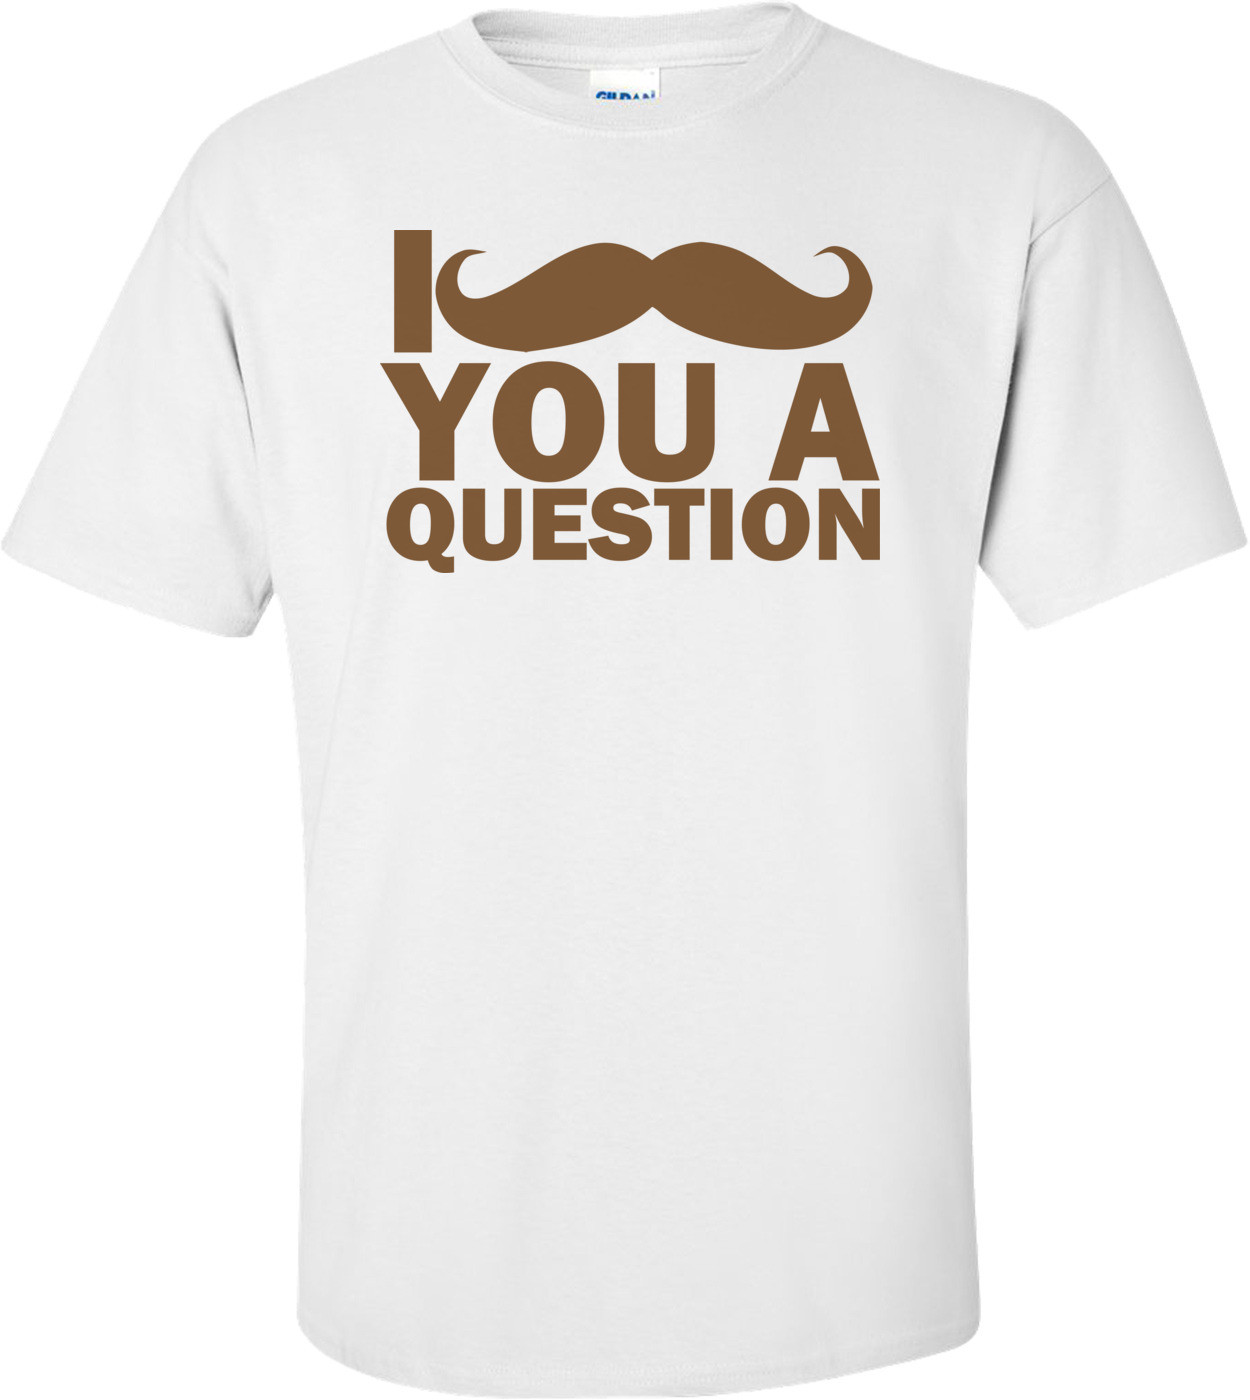 I Mustache You A Question Funny Shirt